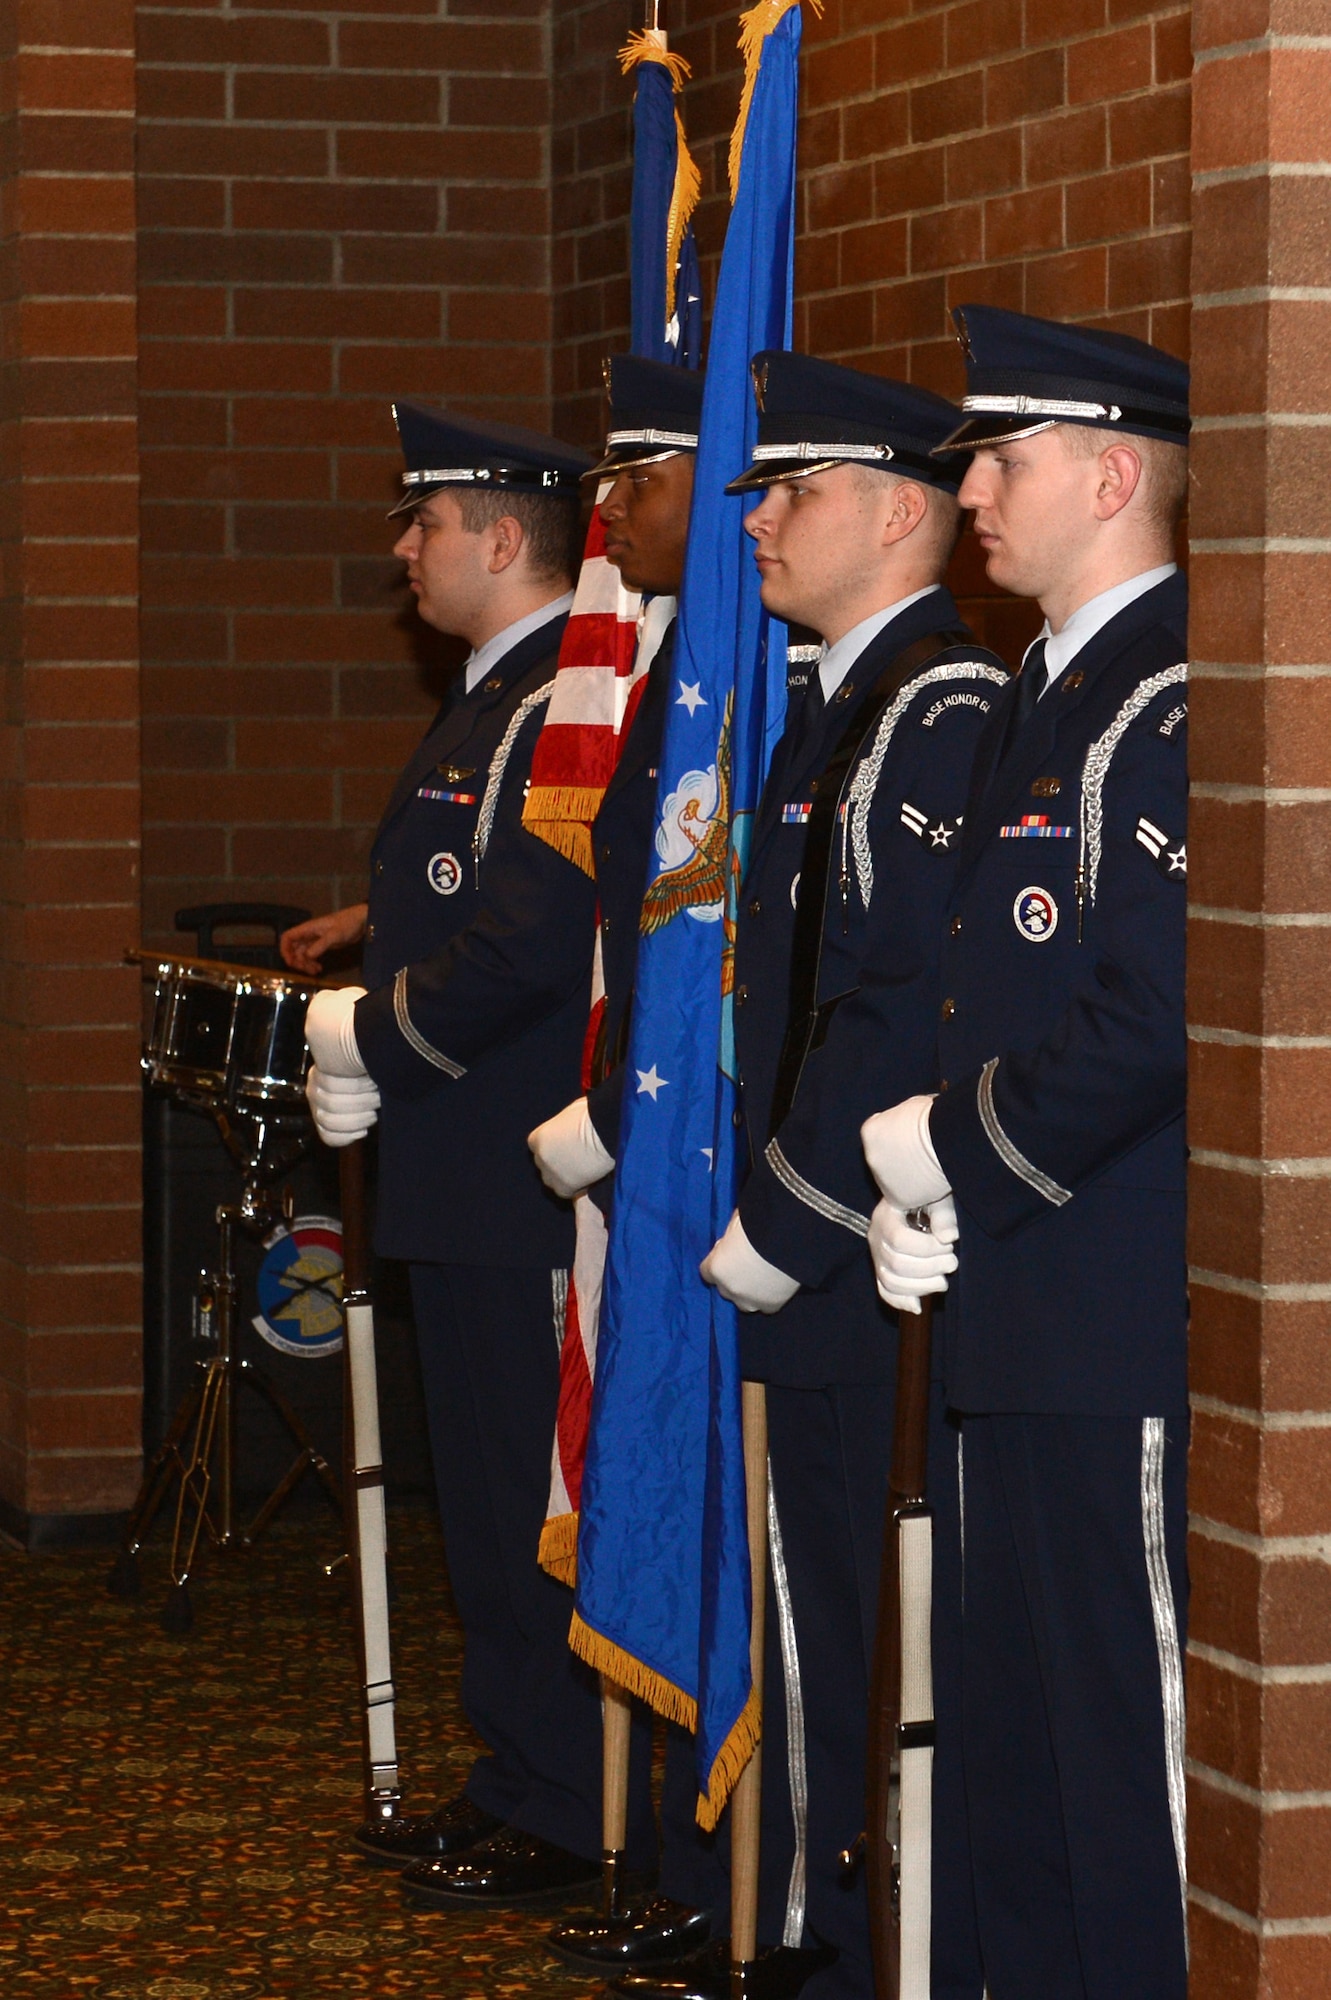 Members of the McChord Field Honor Guard prepare to present the U.S. and Air Force flags during the 2017 Annual Awards Banquet at the McChord Field Club, Joint Base Lewis-McChord, Wash., Feb. 23, 2018. The McChord Field Honor Guard participates in many official ceremonies as well as render military honors to Air Force personnel and their families during funeral services.